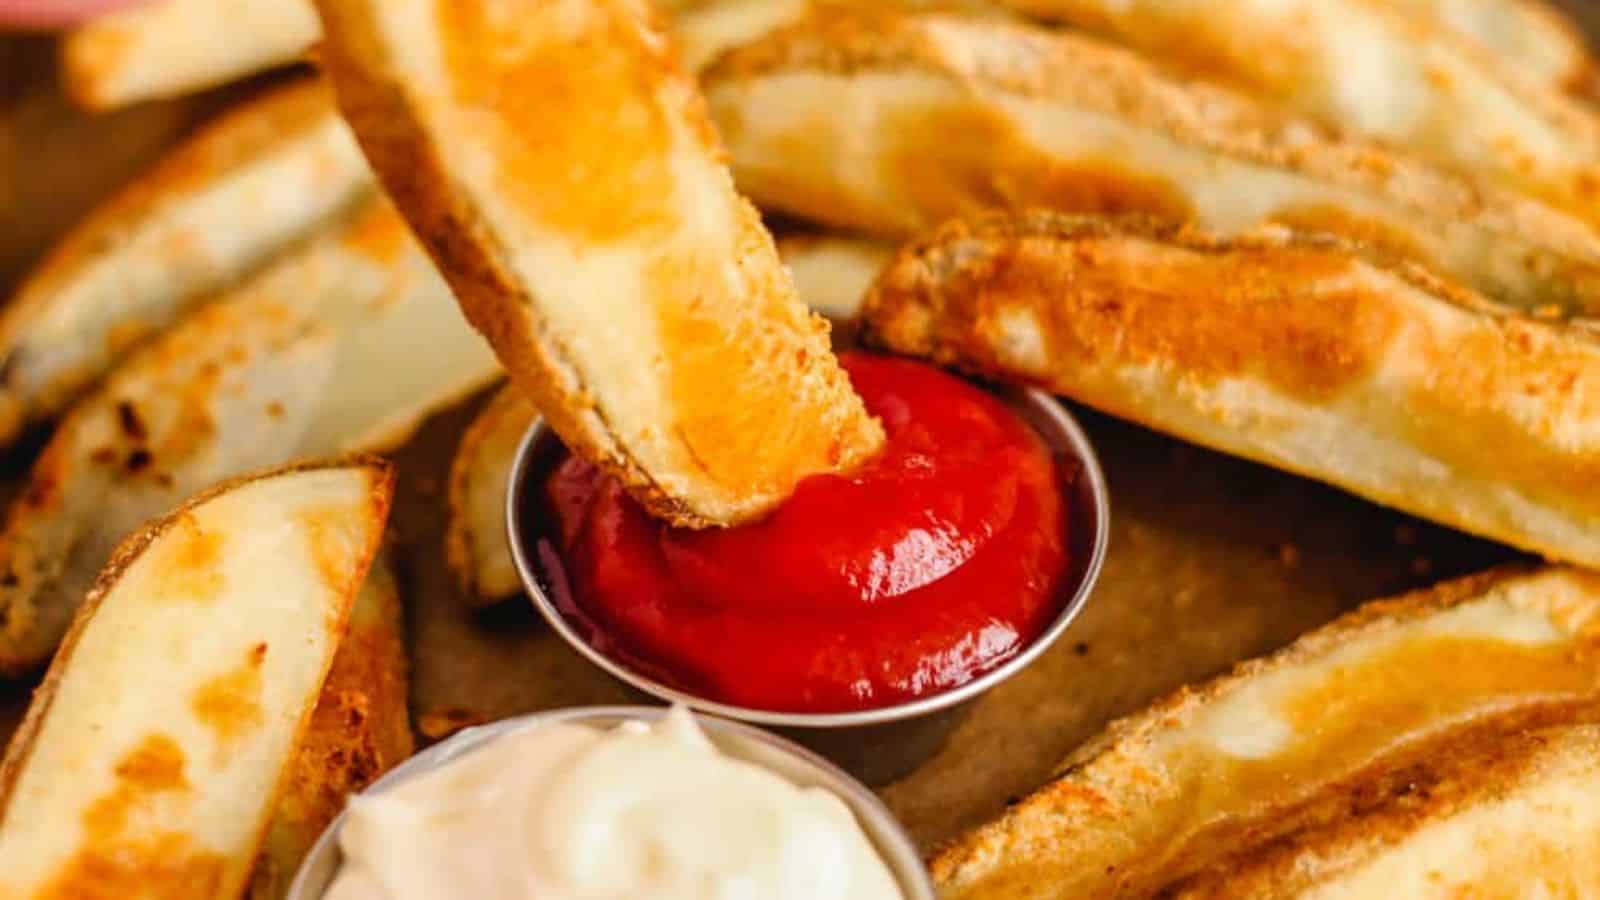 A potato wedge being dipped into ketchup.